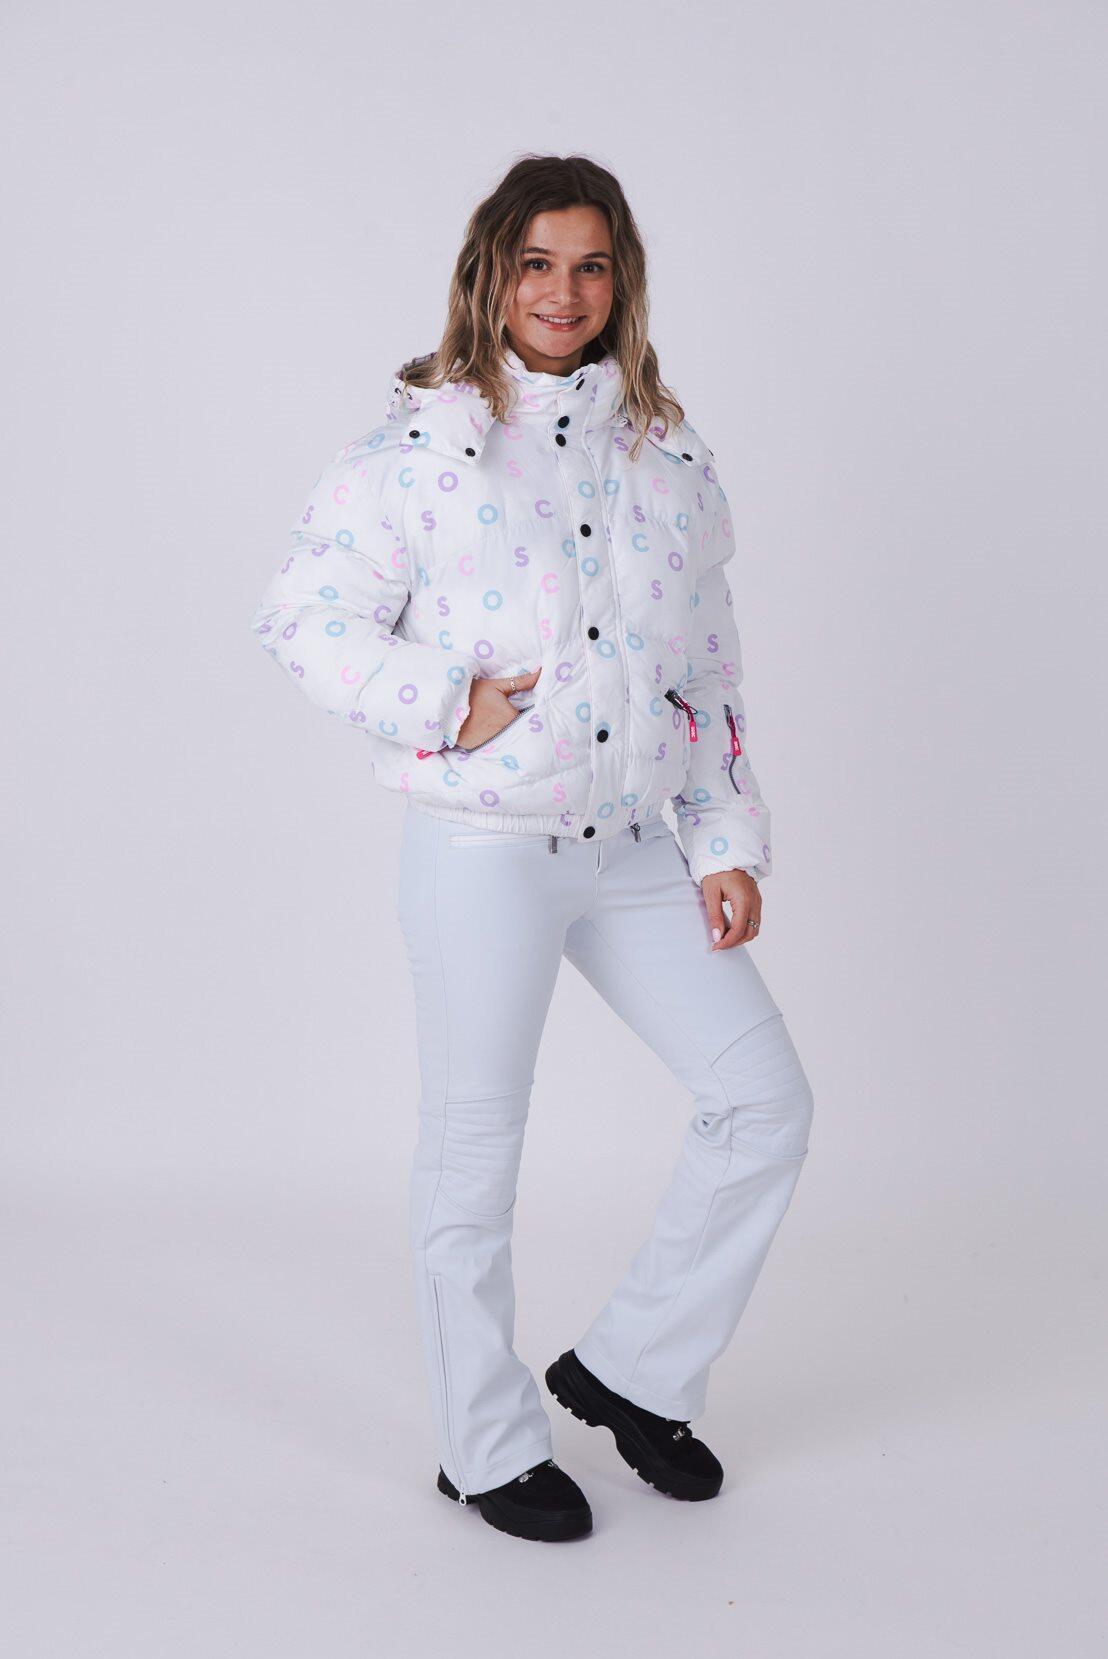 White OOSC Print Chic Puffer Jacket 5/5